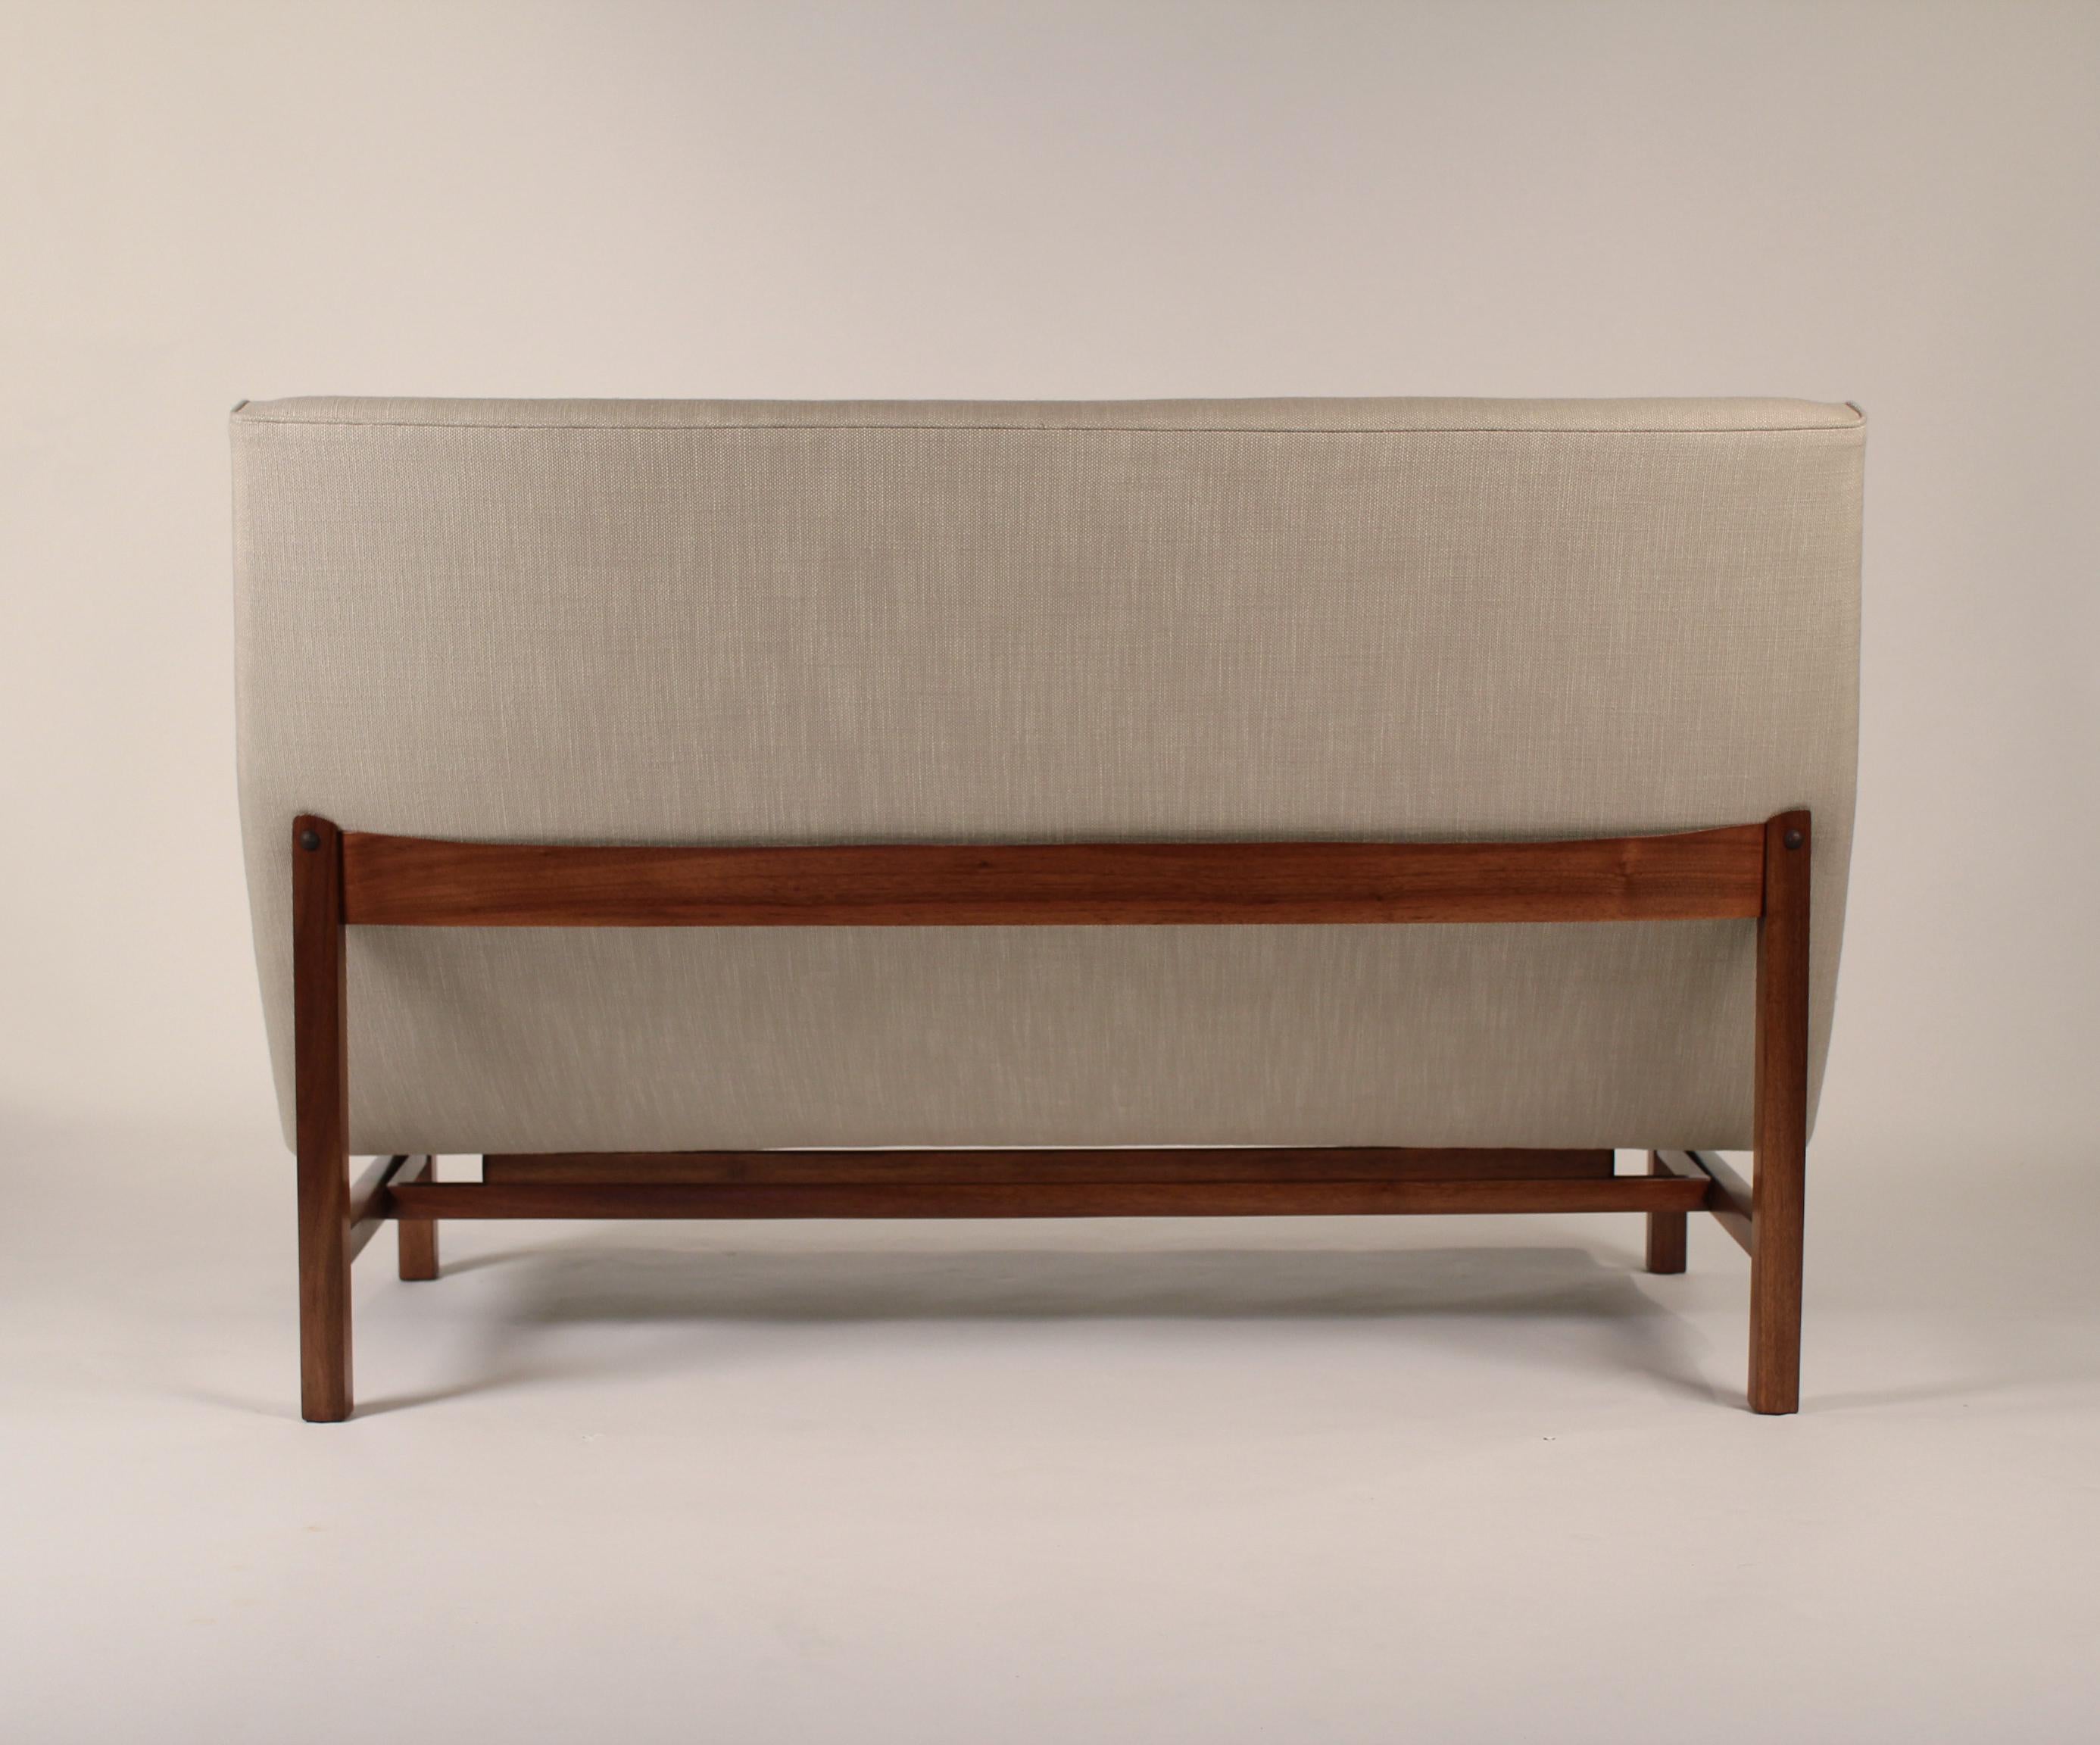 Small sofa designed by Jens Risom from the 1960s fully restored. New perennials upholstery, new foam, frame trued and refinished. An exceptional looking design created with ergonomic comfort in mind.